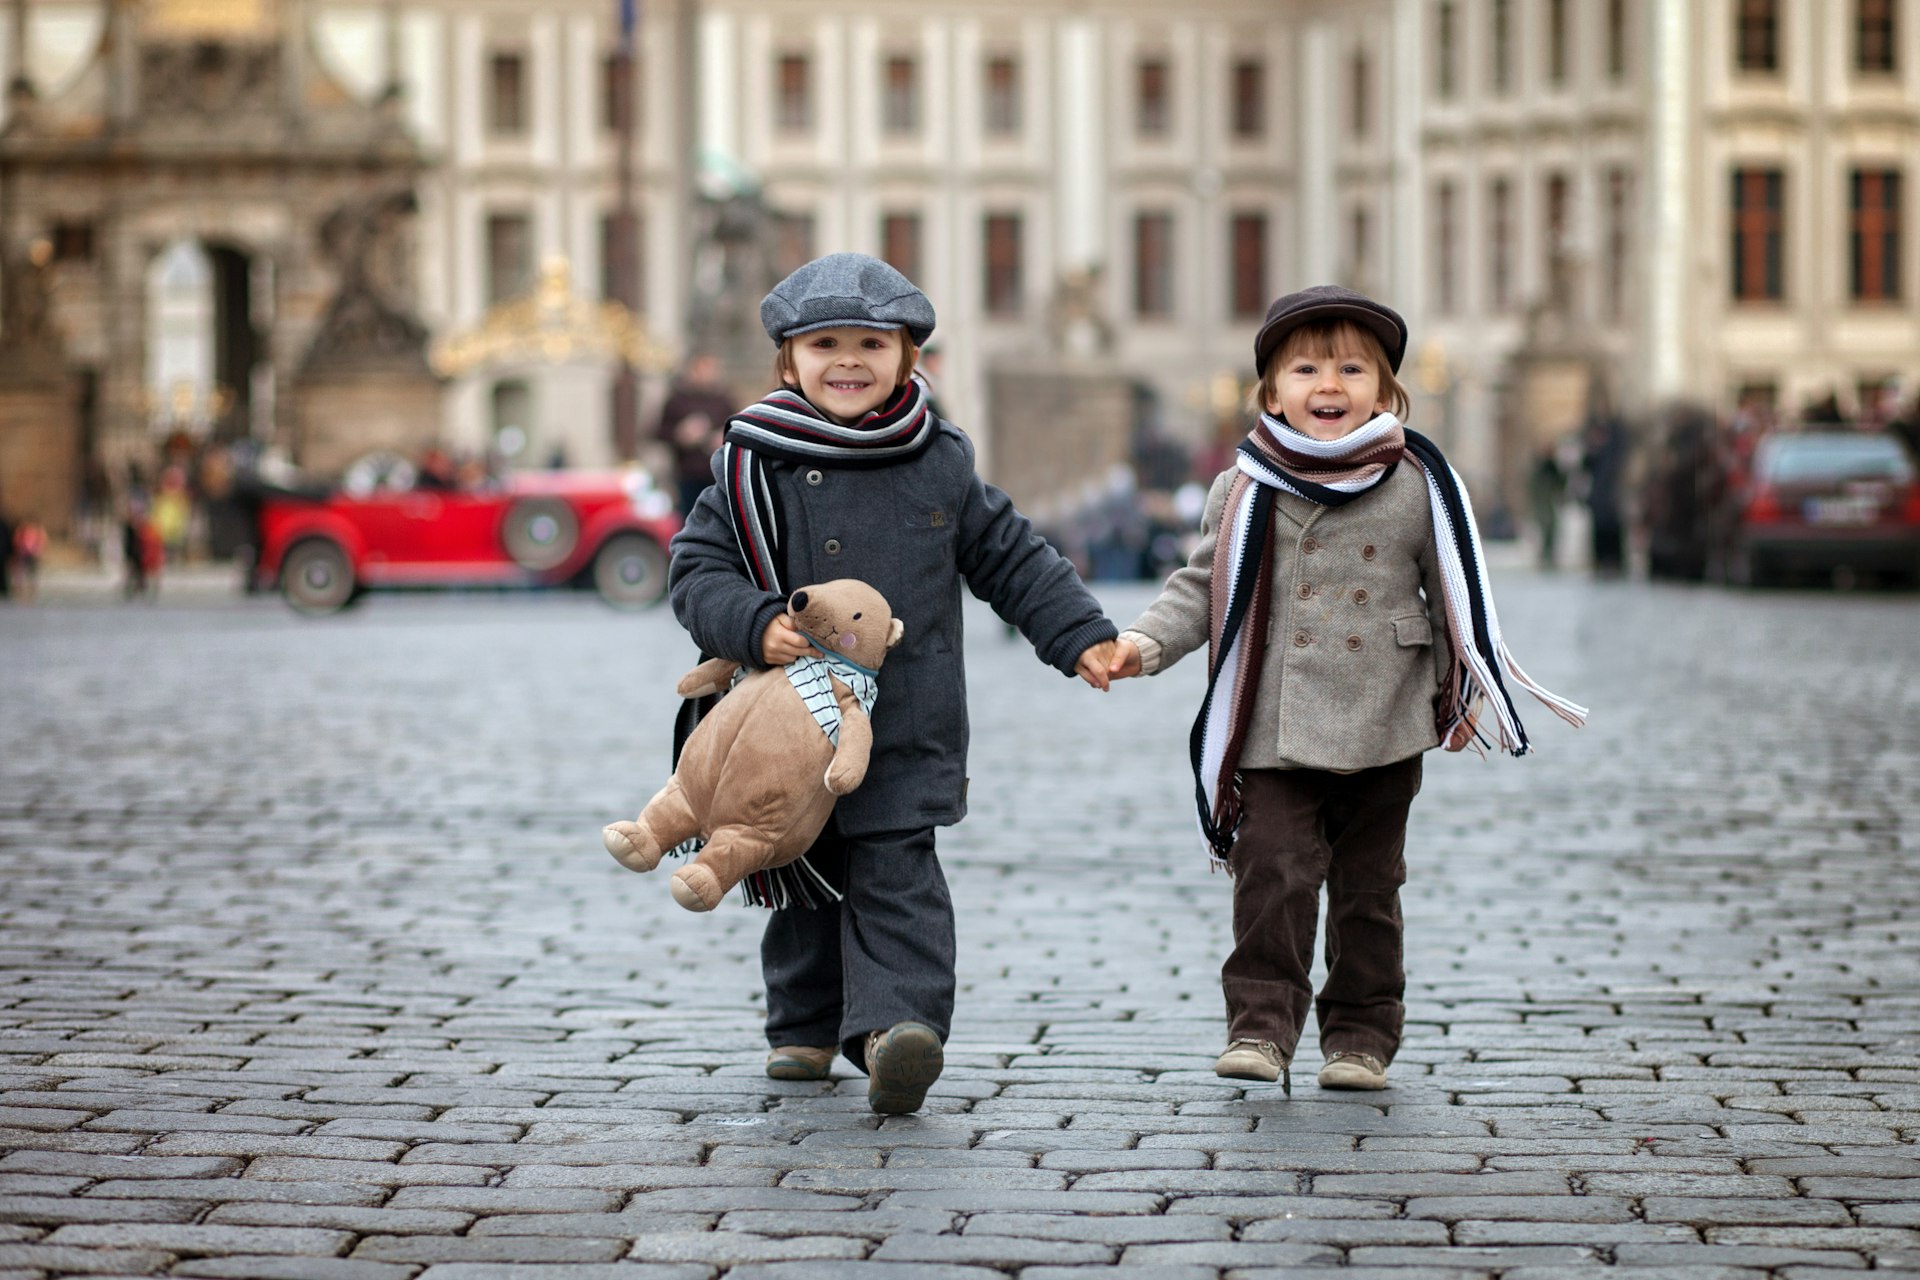 Two boys with hats, scarves and a teddy bear walking on cobblestone streets in Prague